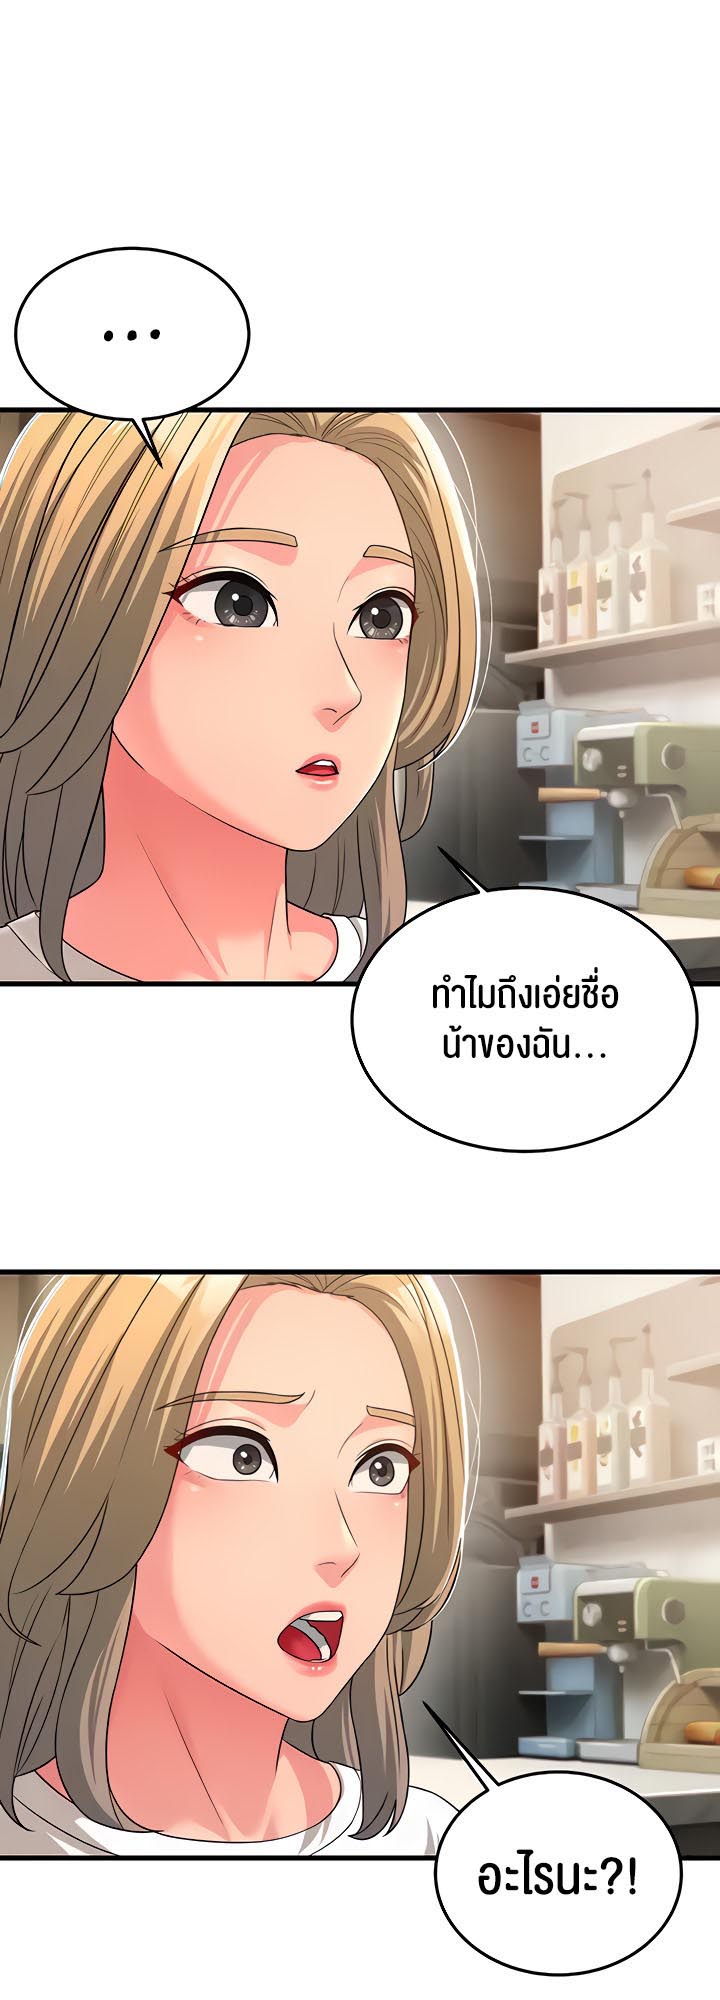 à¸­à¹ˆà¸²à¸™à¹‚à¸”à¸ˆà¸´à¸™ à¹€à¸£à¸·à¹ˆà¸­à¸‡ Mother in Law Bends To My Will 11 48